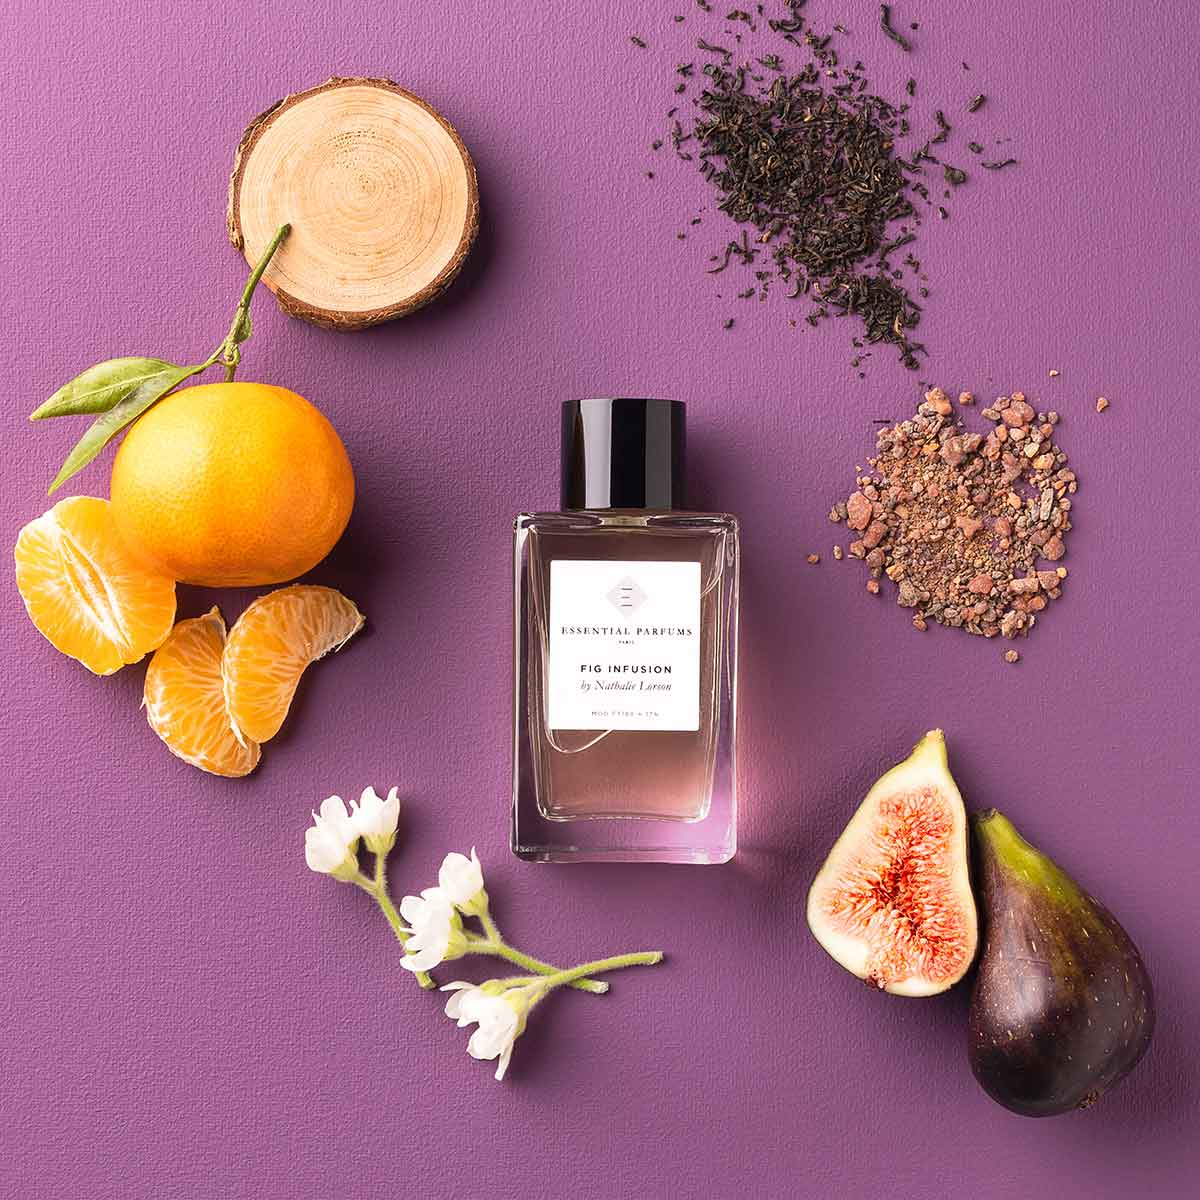 Fig-infusion-essential-parfums-7.png